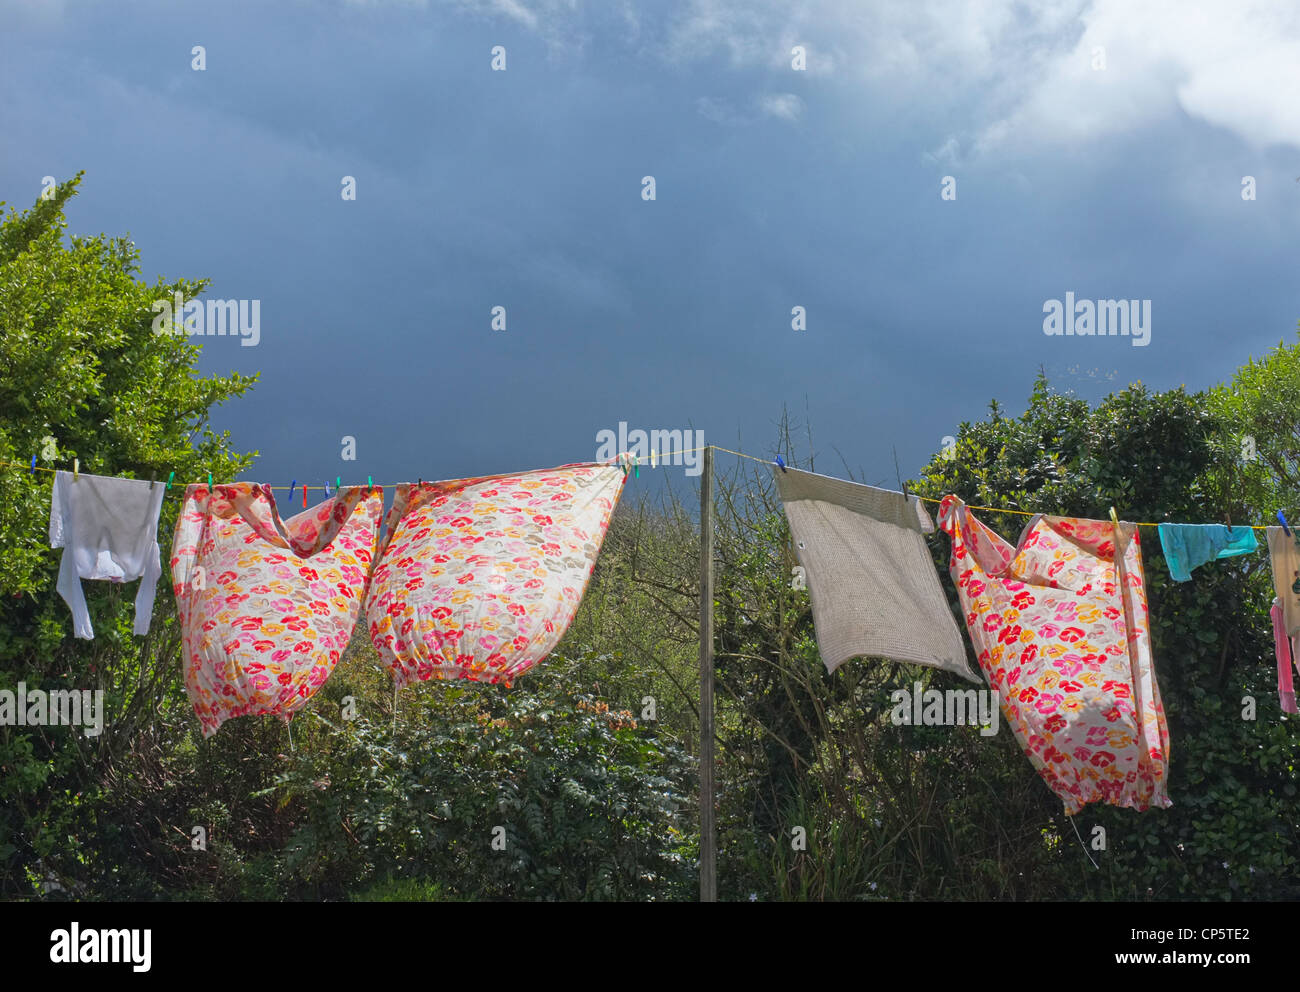 Washing drying on a stormy day Stock Photo